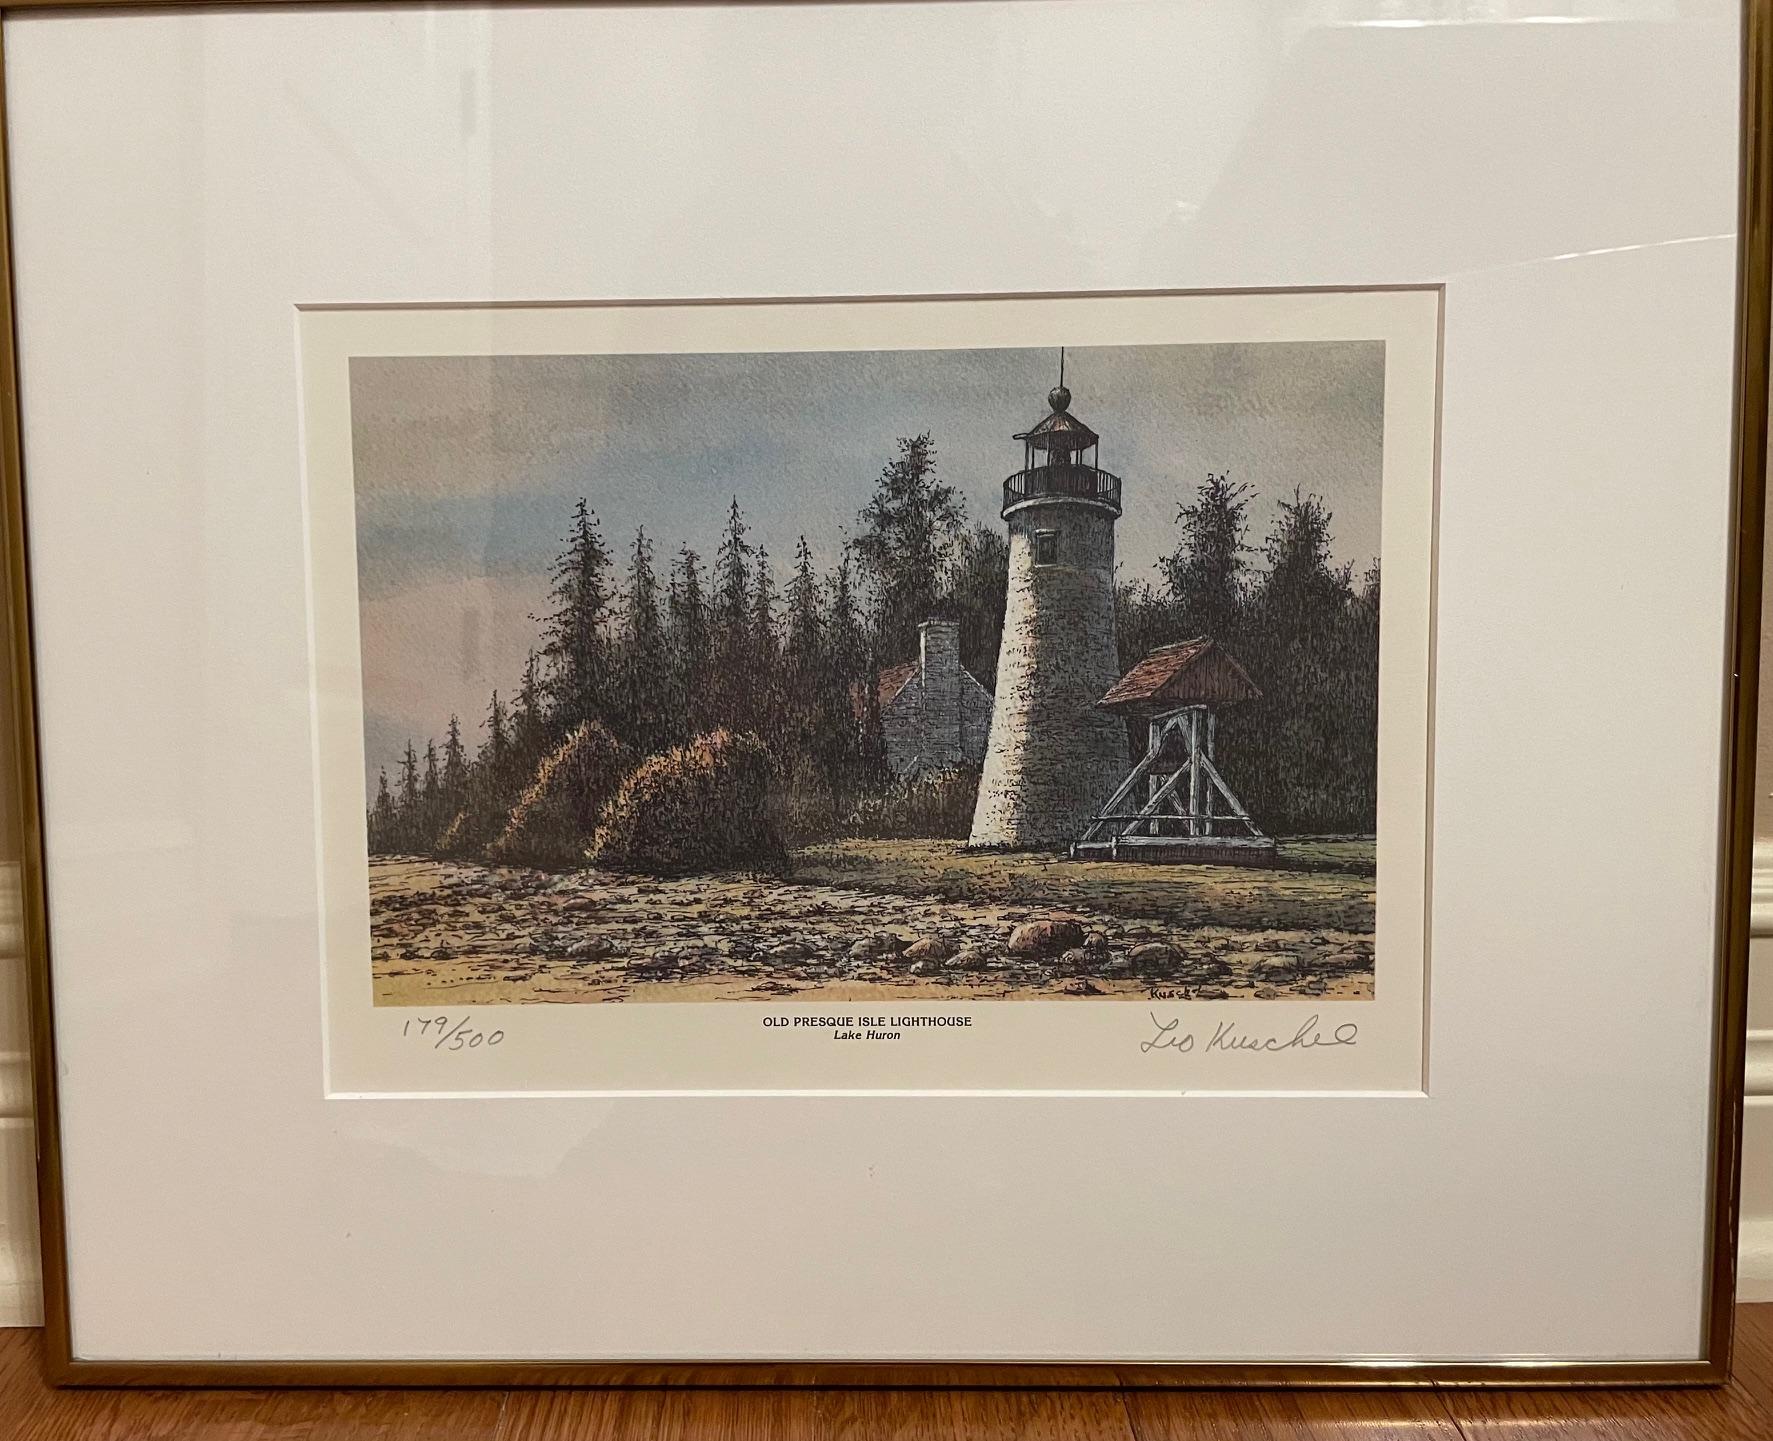 Unknown Landscape Print - Old Presque Isle Lighthouse (Michigan)  -lithograph by Leo Kuschel